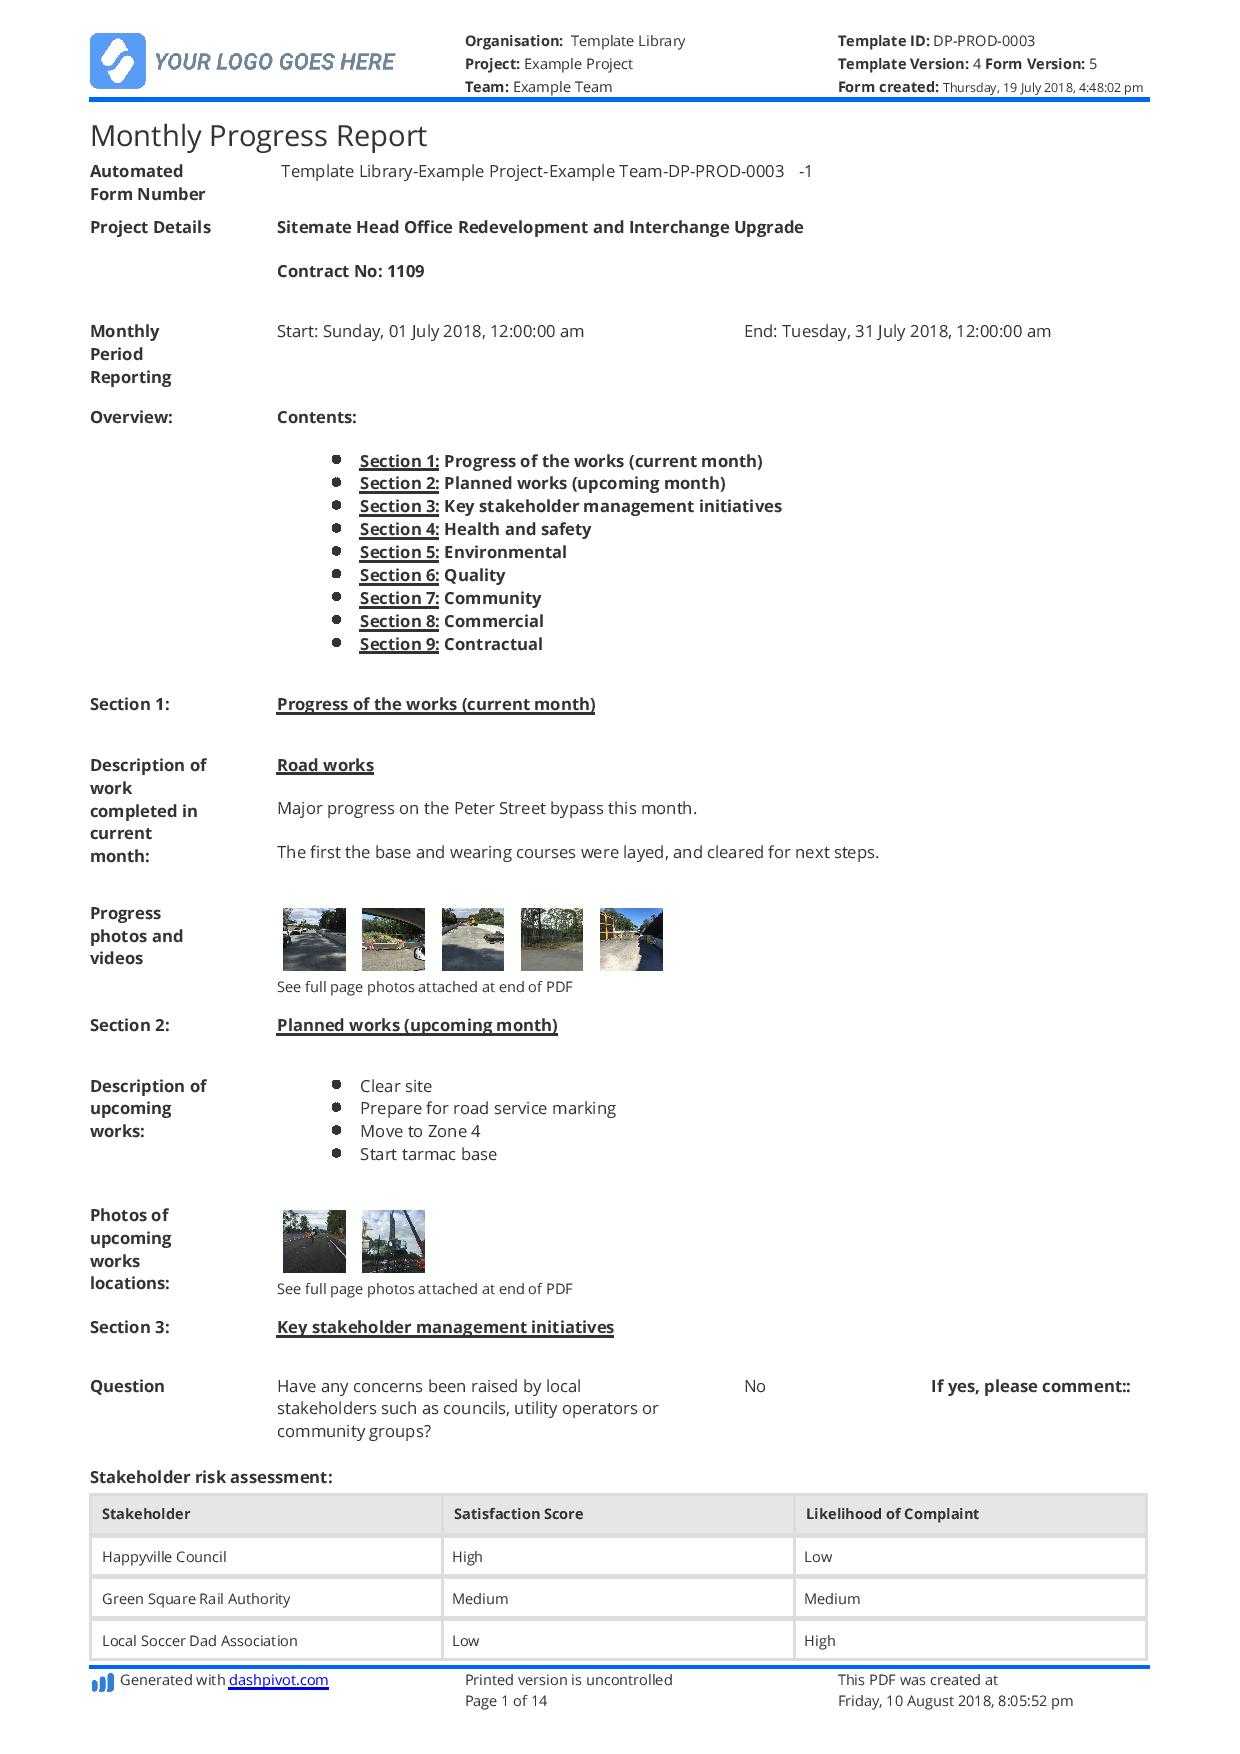 Monthly Construction Progress Report Template: Use This For Monthly Project Progress Report Template